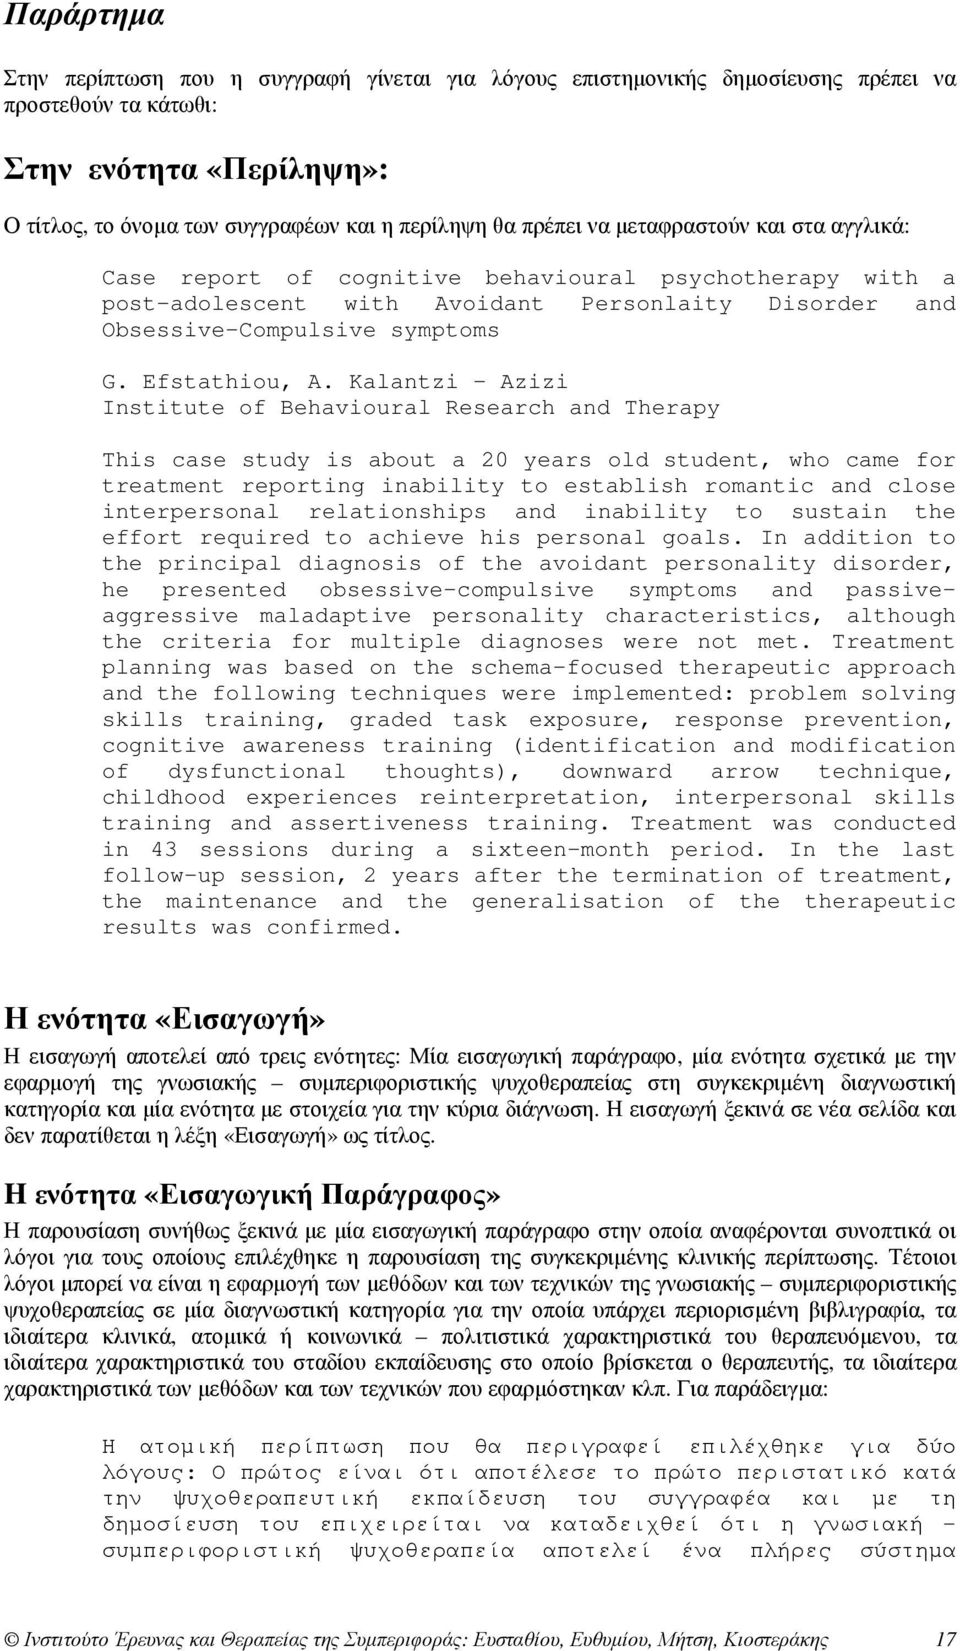 Kalantzi - Azizi Institute of Behavioural Research and Therapy This case study is about a 20 years old student, who came for treatment reporting inability to establish romantic and close